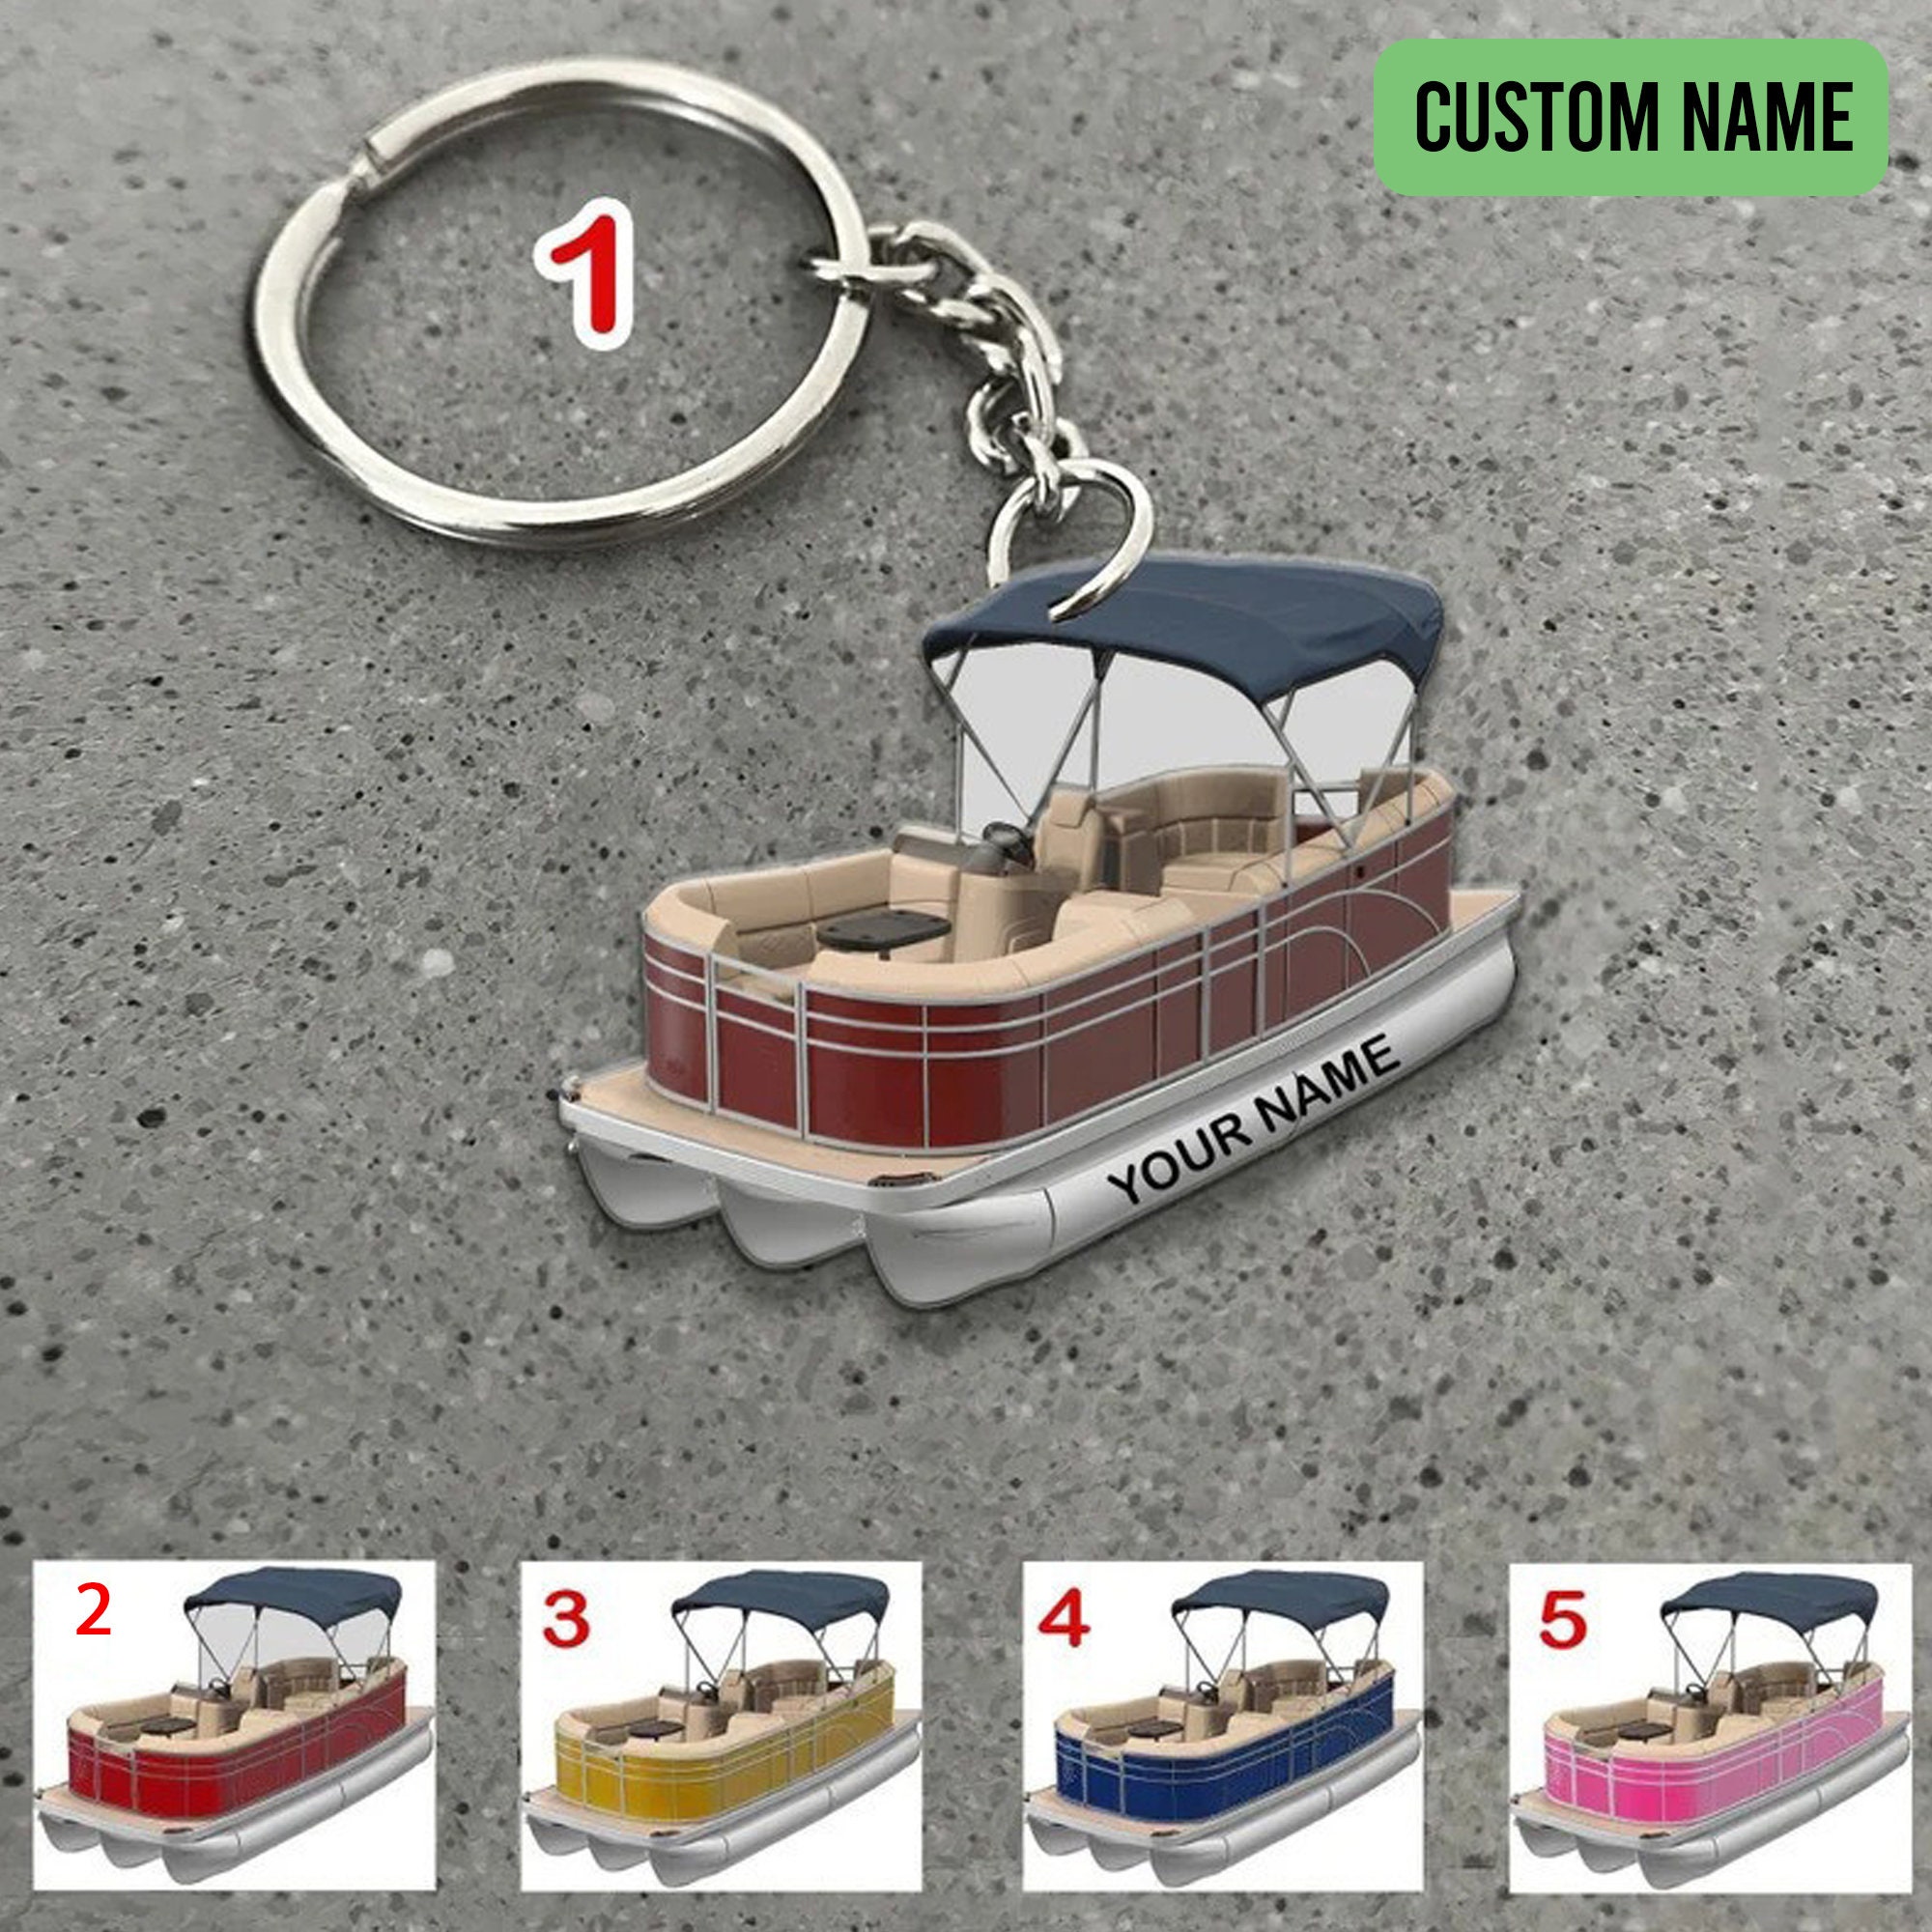 15 Boat Gift Ideas for Someone Who Loves the Water